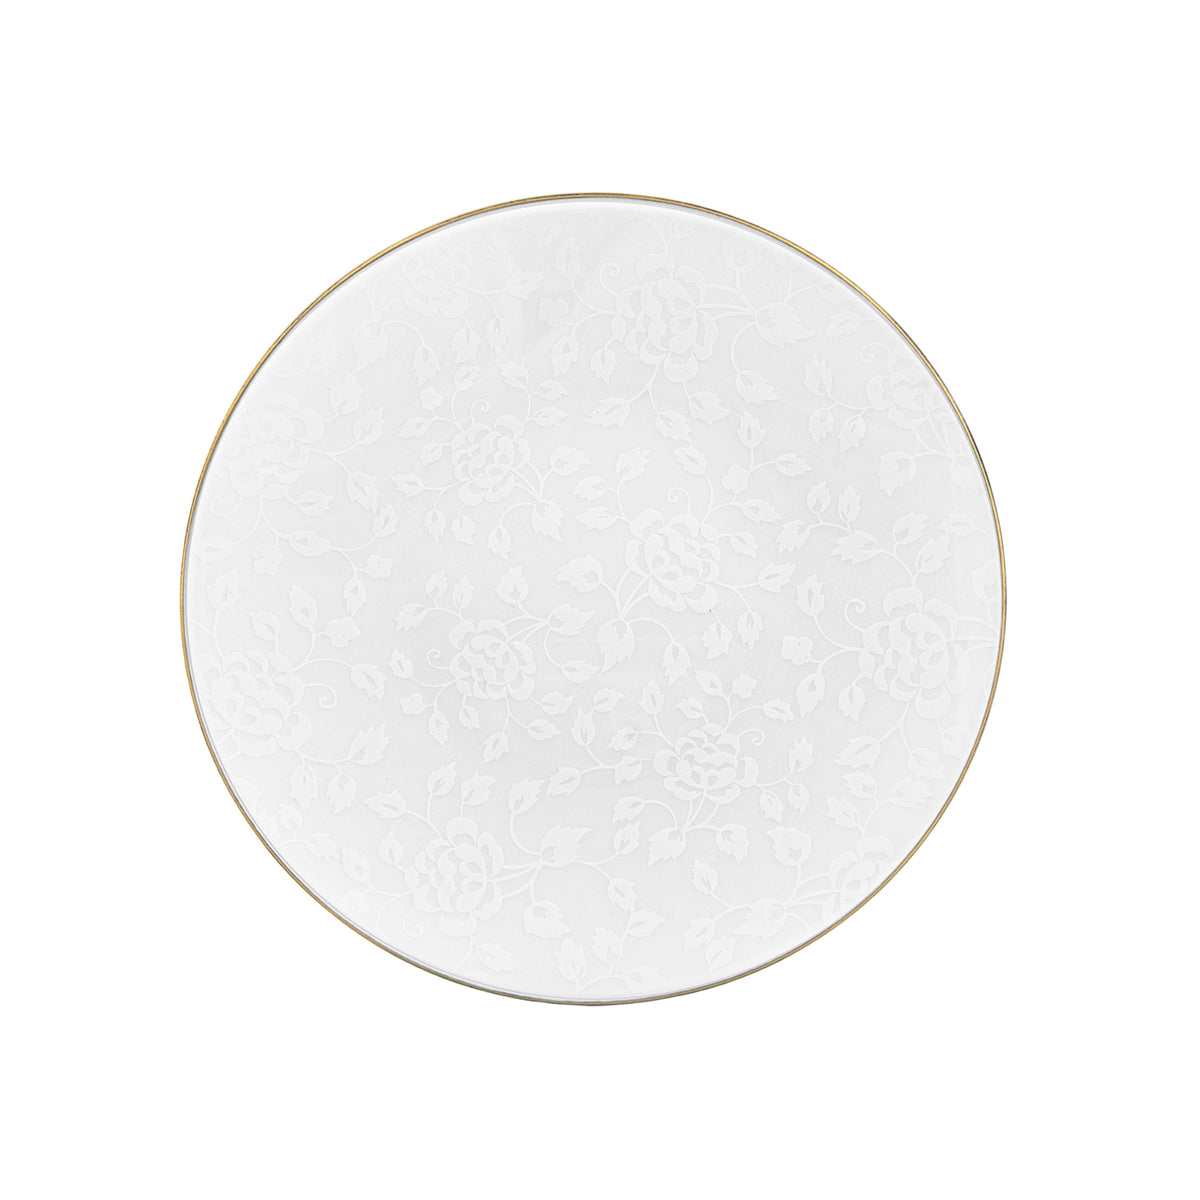 White on white thistles with gold thread - Dinner plate